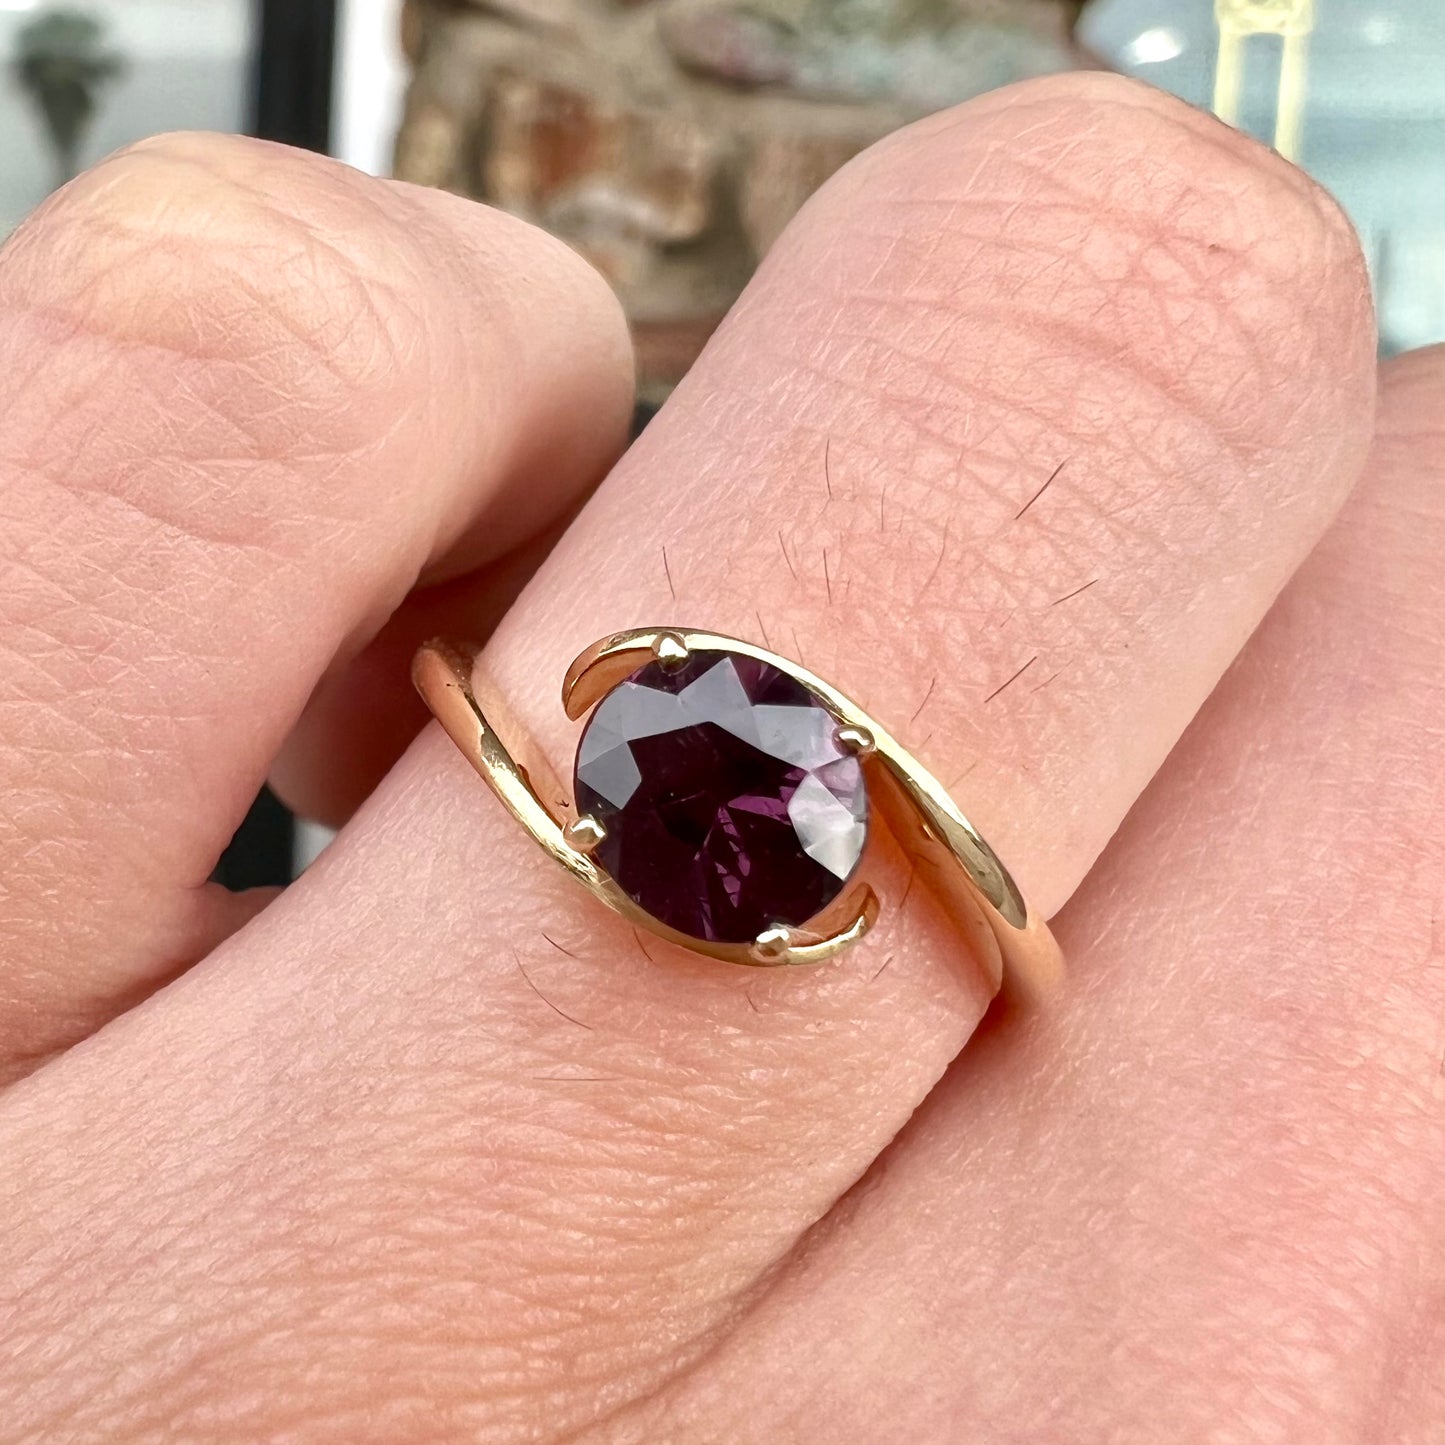 A yellow gold solitaire engagement ring set with a faceted oval cut color change garnet stone.